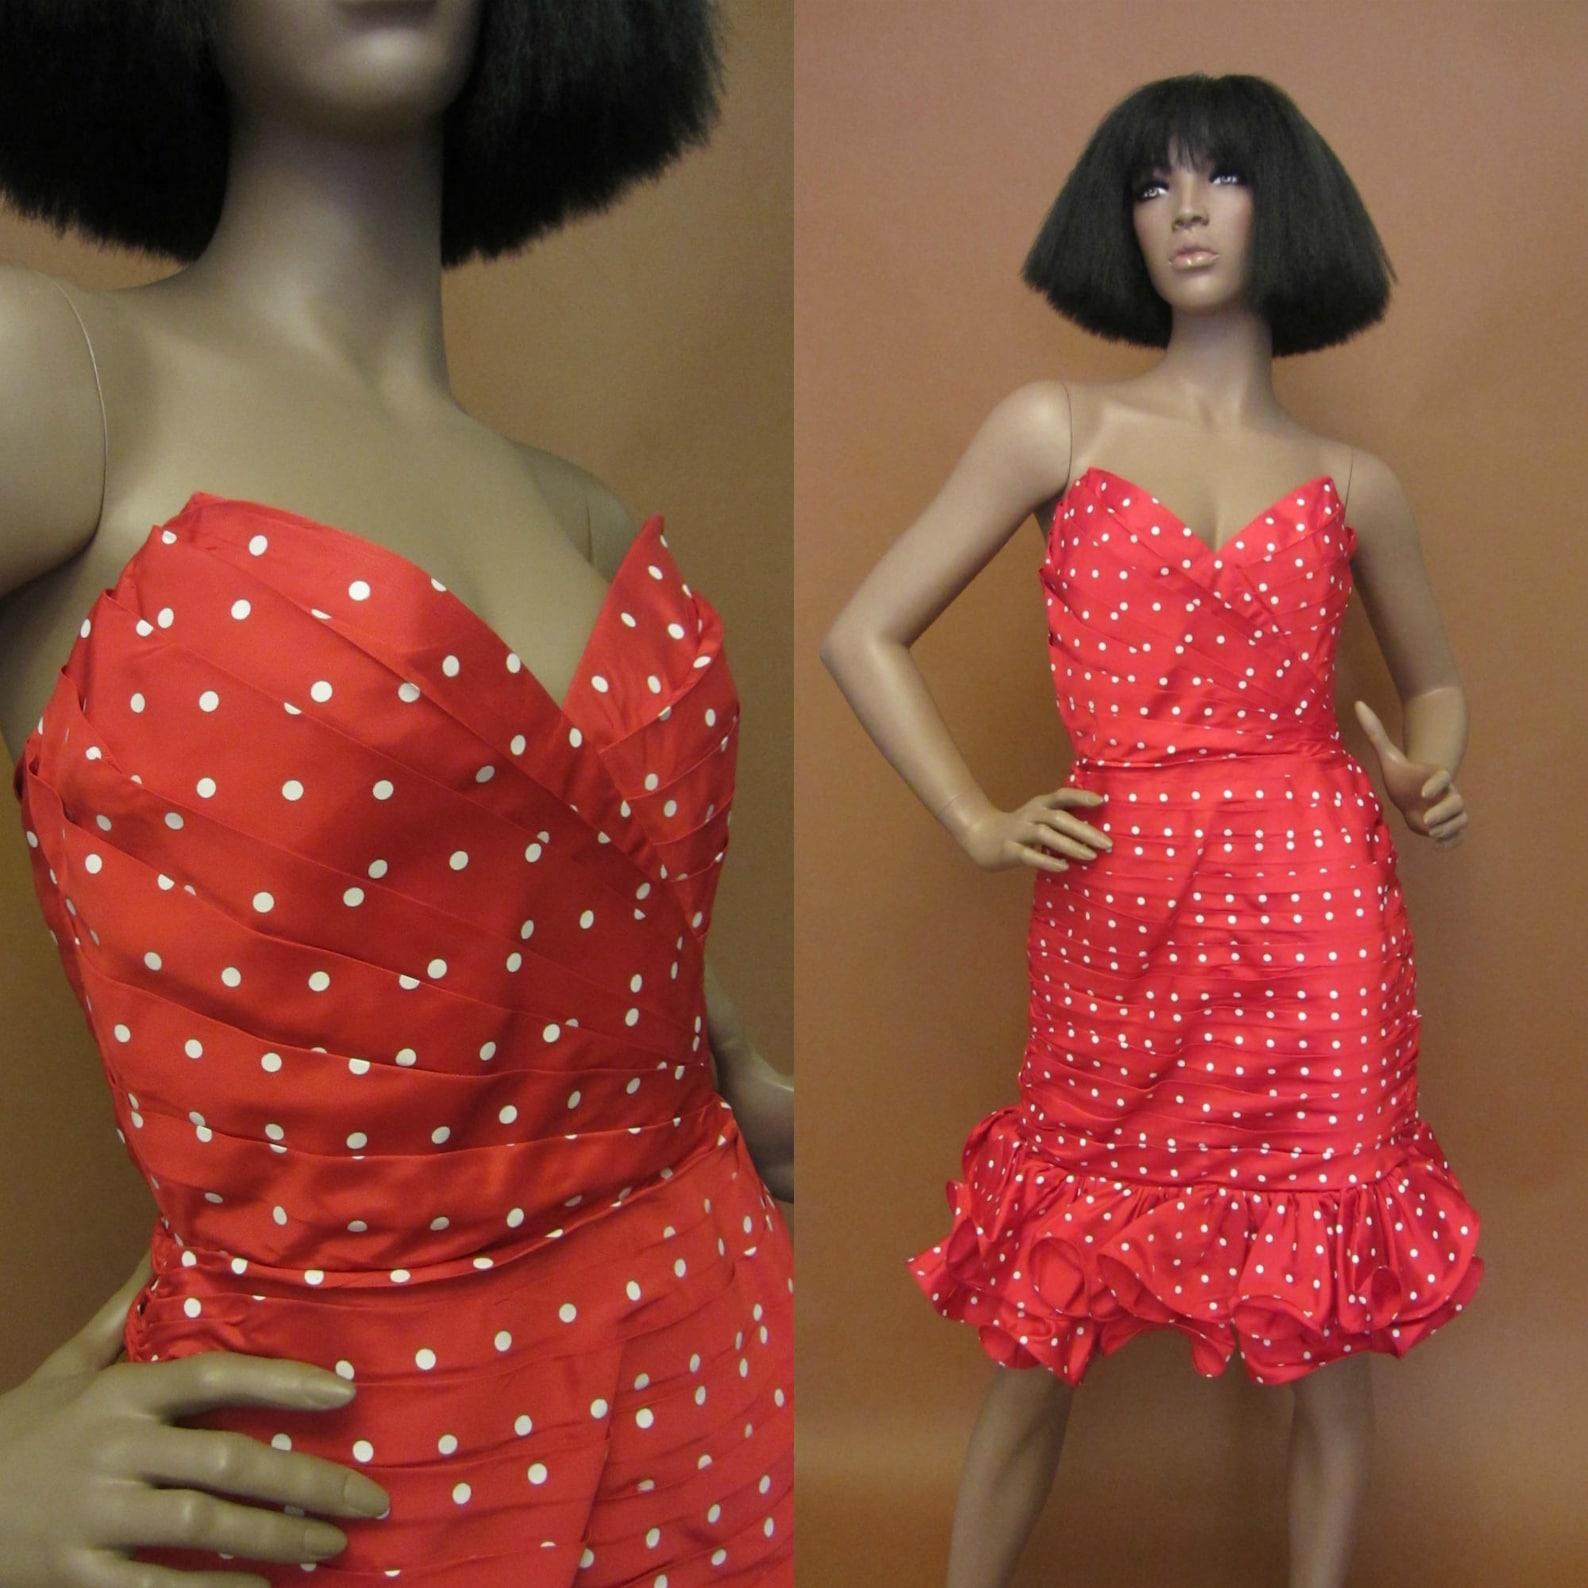 Lillie Rubin cocktail dress. red and white polka dot print. strapless boned sweetheart bodice. gorgeous pleating throughout. origami ruffle hem. back zip closure. dress is lined.

❊ Gathered pleats at back of dress create a bustle effect! Just